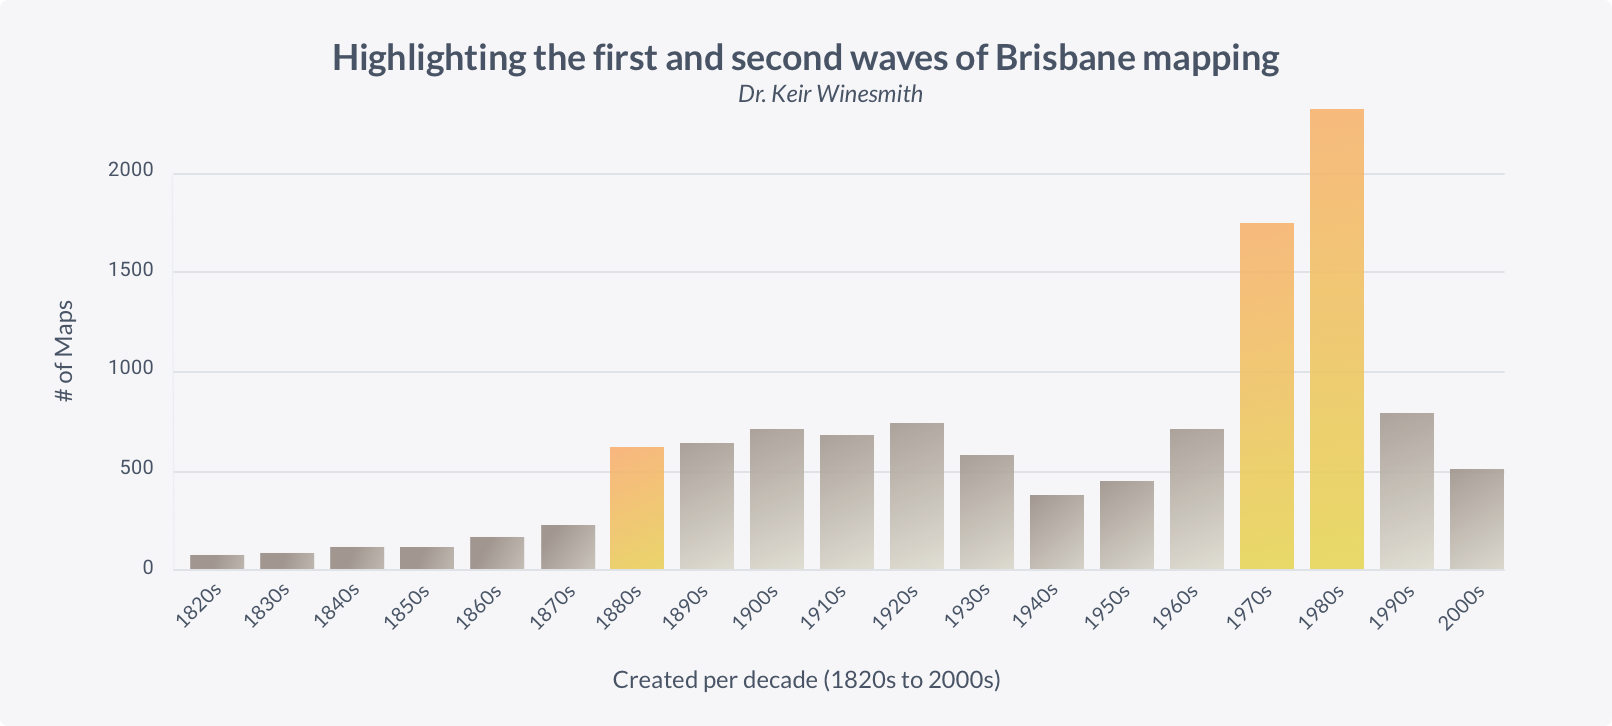 Waves of Brisbane mapping across the 1820s-2000s